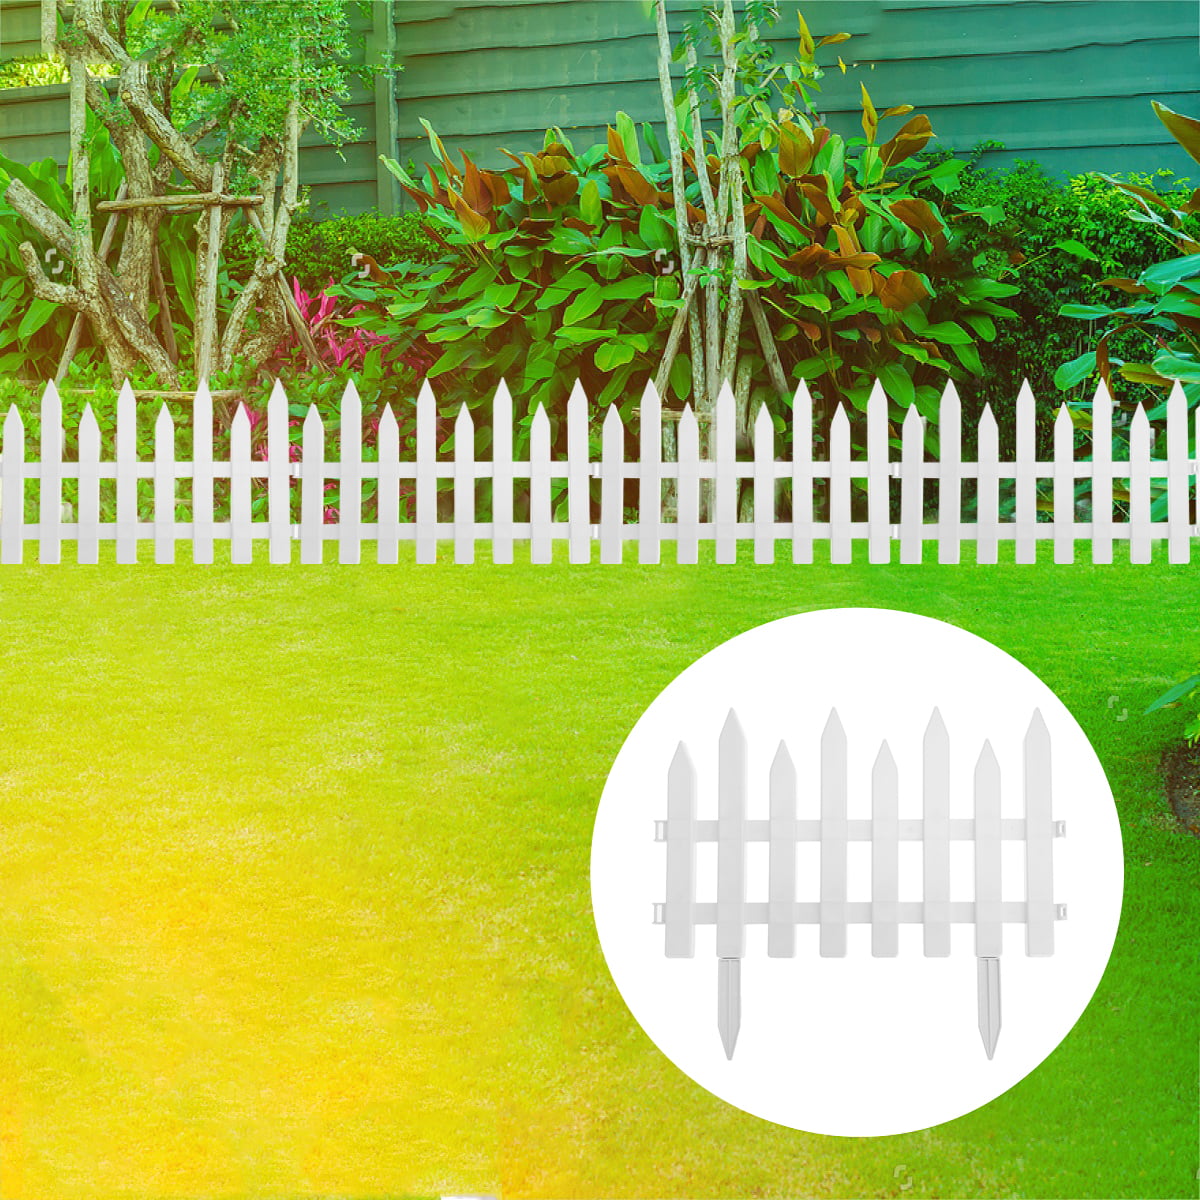 Plastic Garden Border Fence comes with click and clip attachment at each side107 